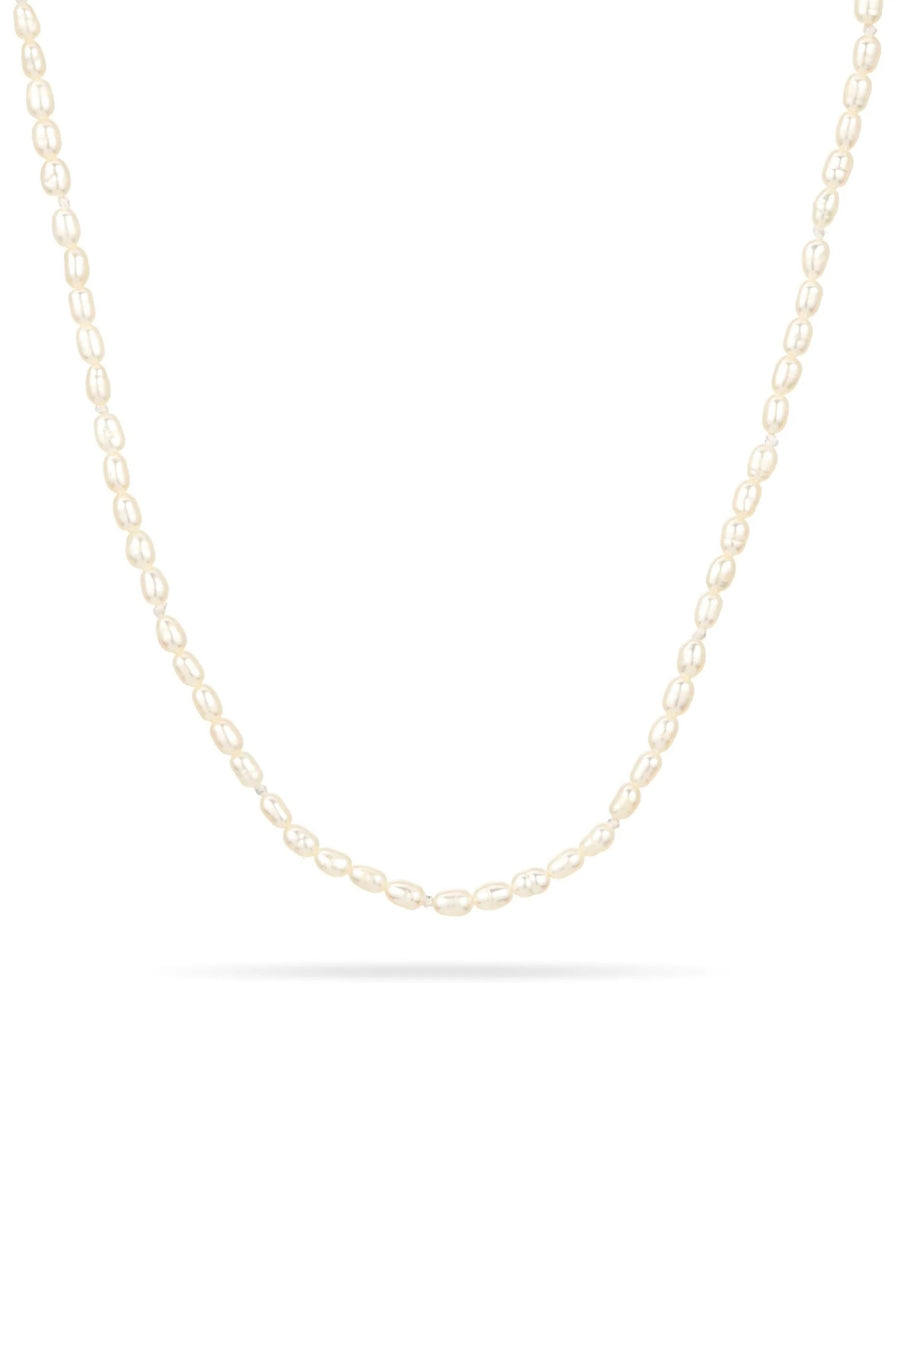 Tiny Seed Pearl Necklace - 14k Yellow Gold